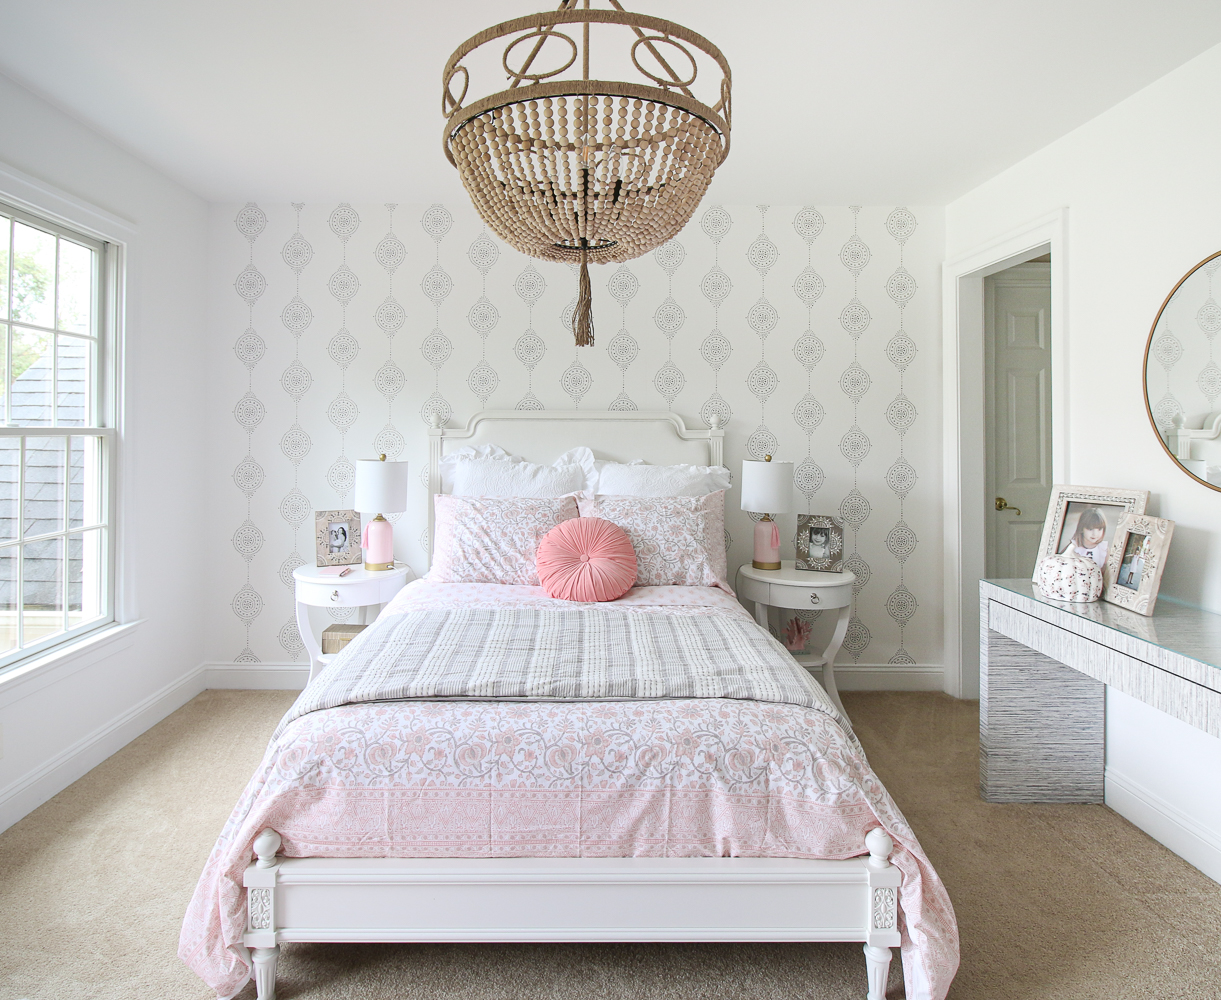 big girl bedroom, Pottery Barn colette bed, Serena and Lily wallpaper, Wood Bead chandelier